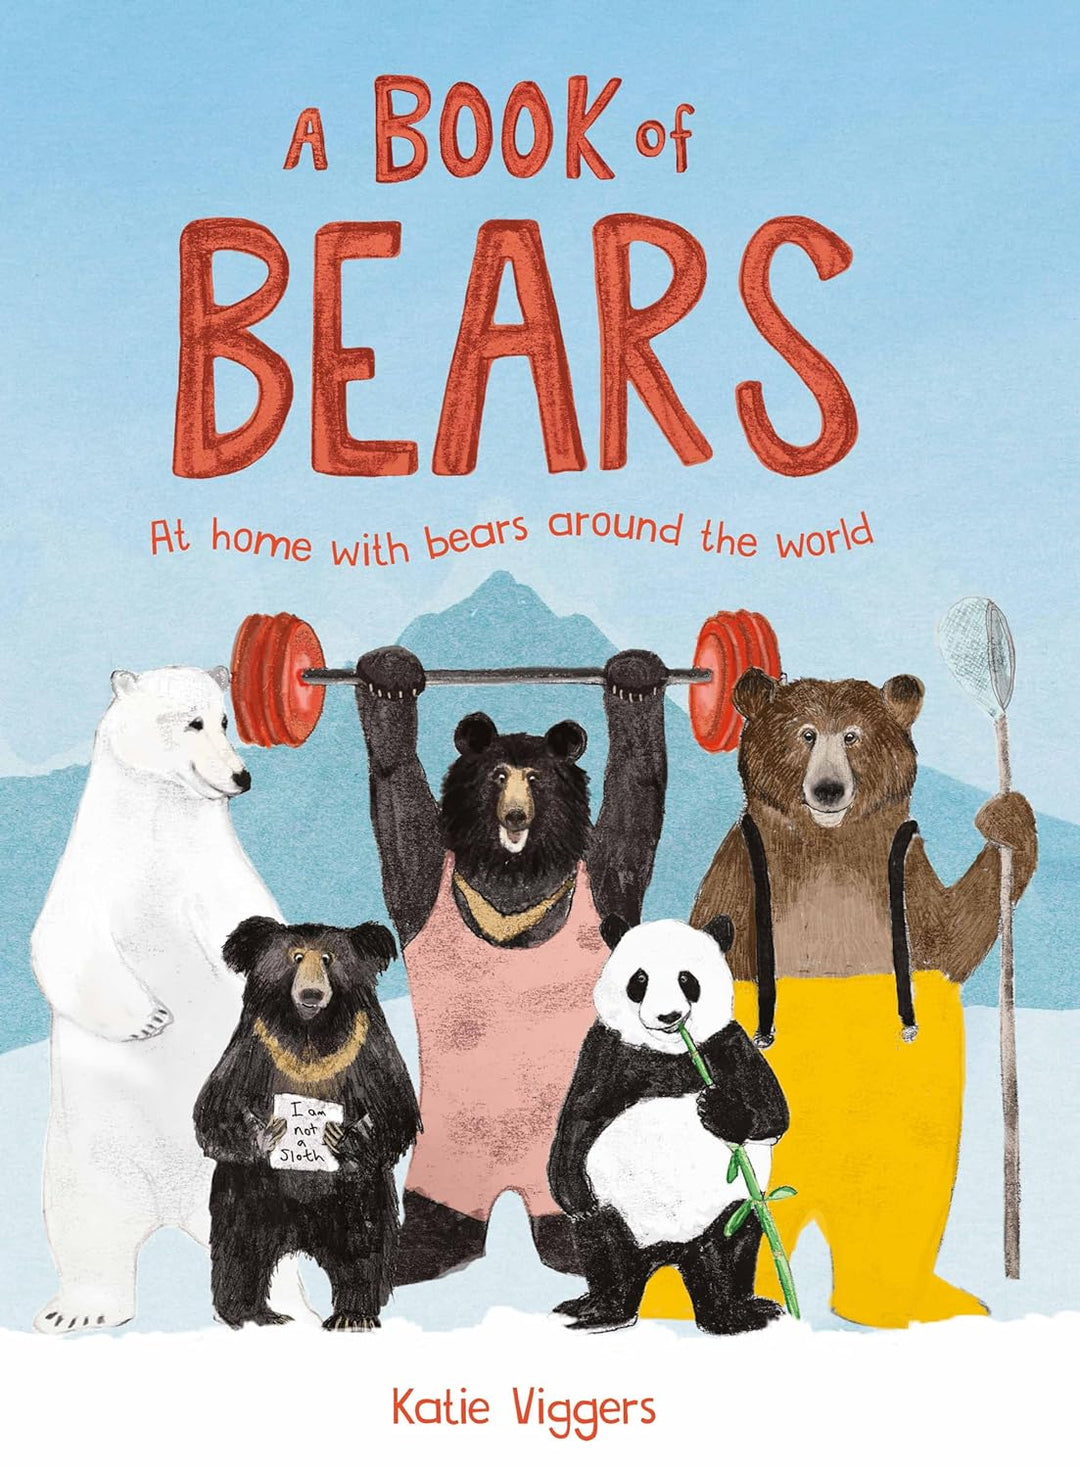 Book of Bears: At Home with Bears Around the World by Katie Viggers 